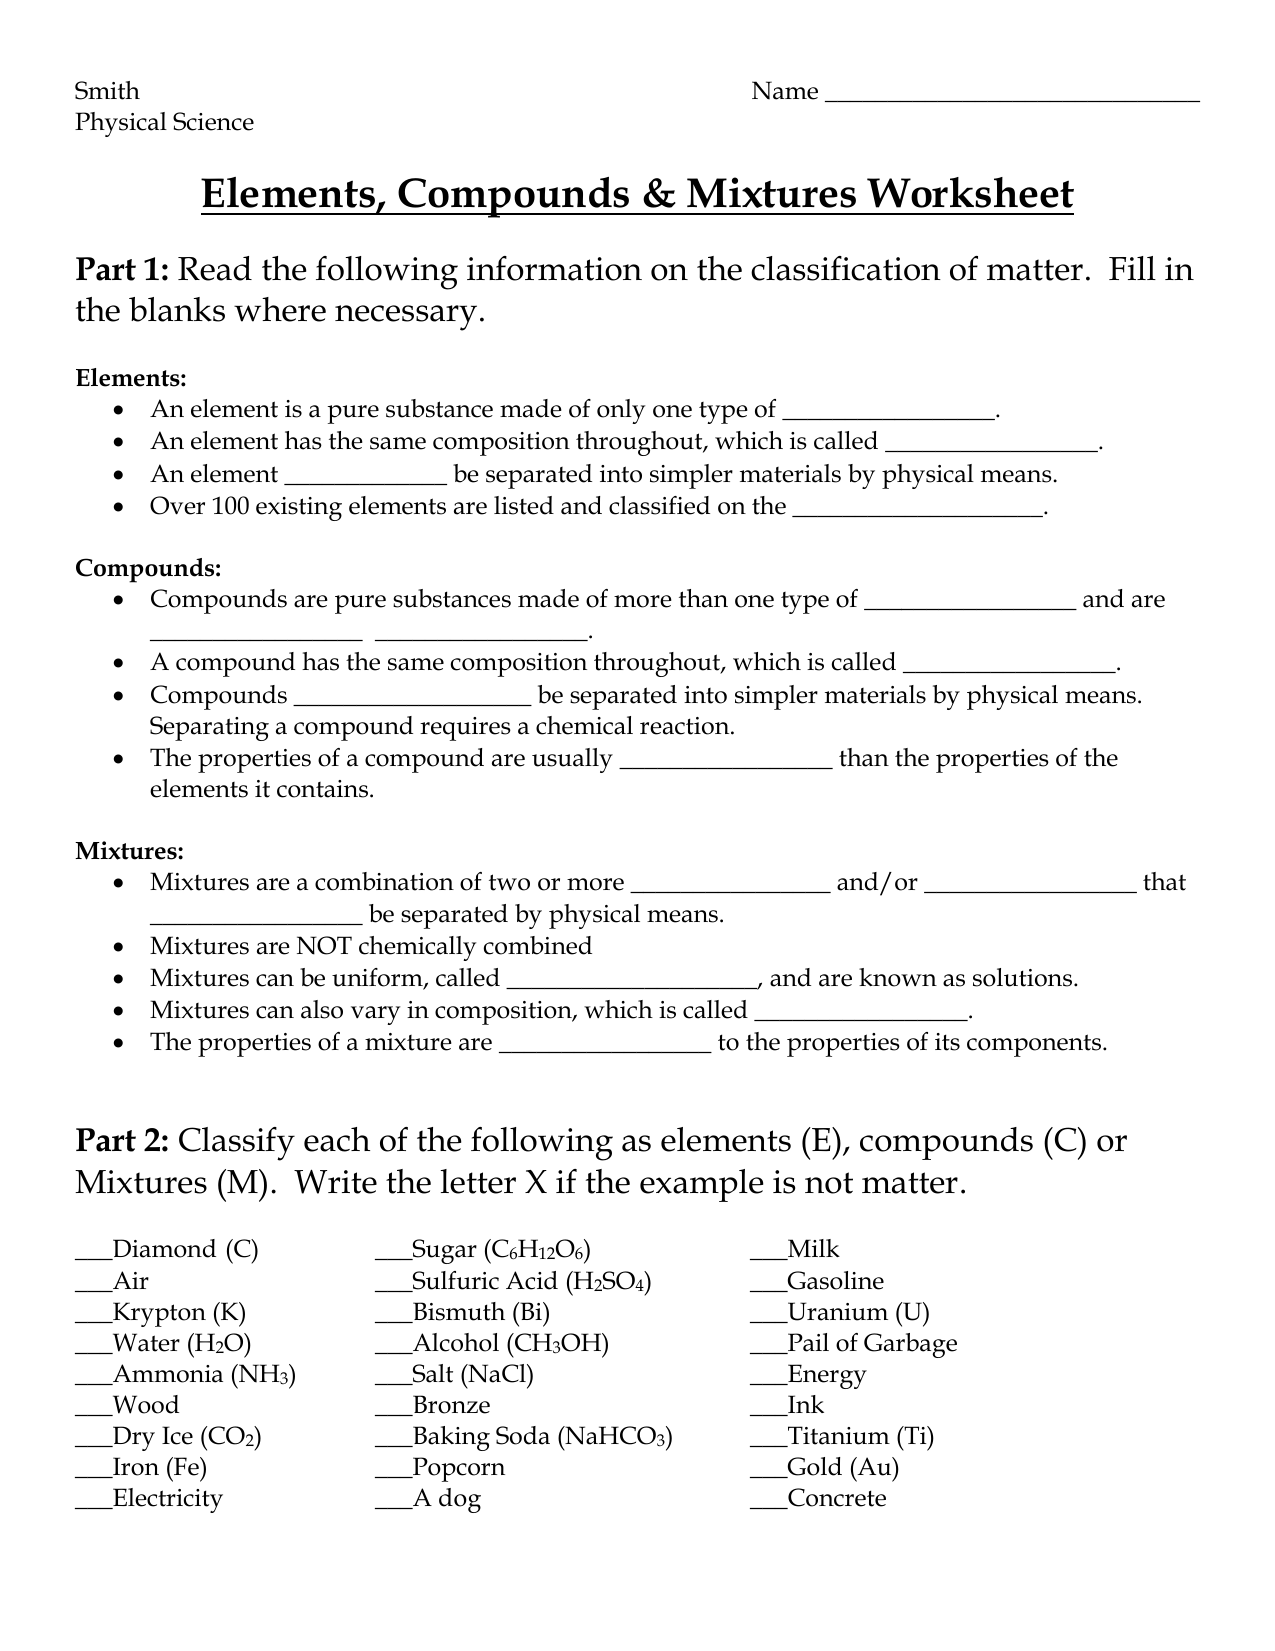 Elements, Compounds & Mixtures Worksheet With Regard To Mixtures Worksheet Answer Key